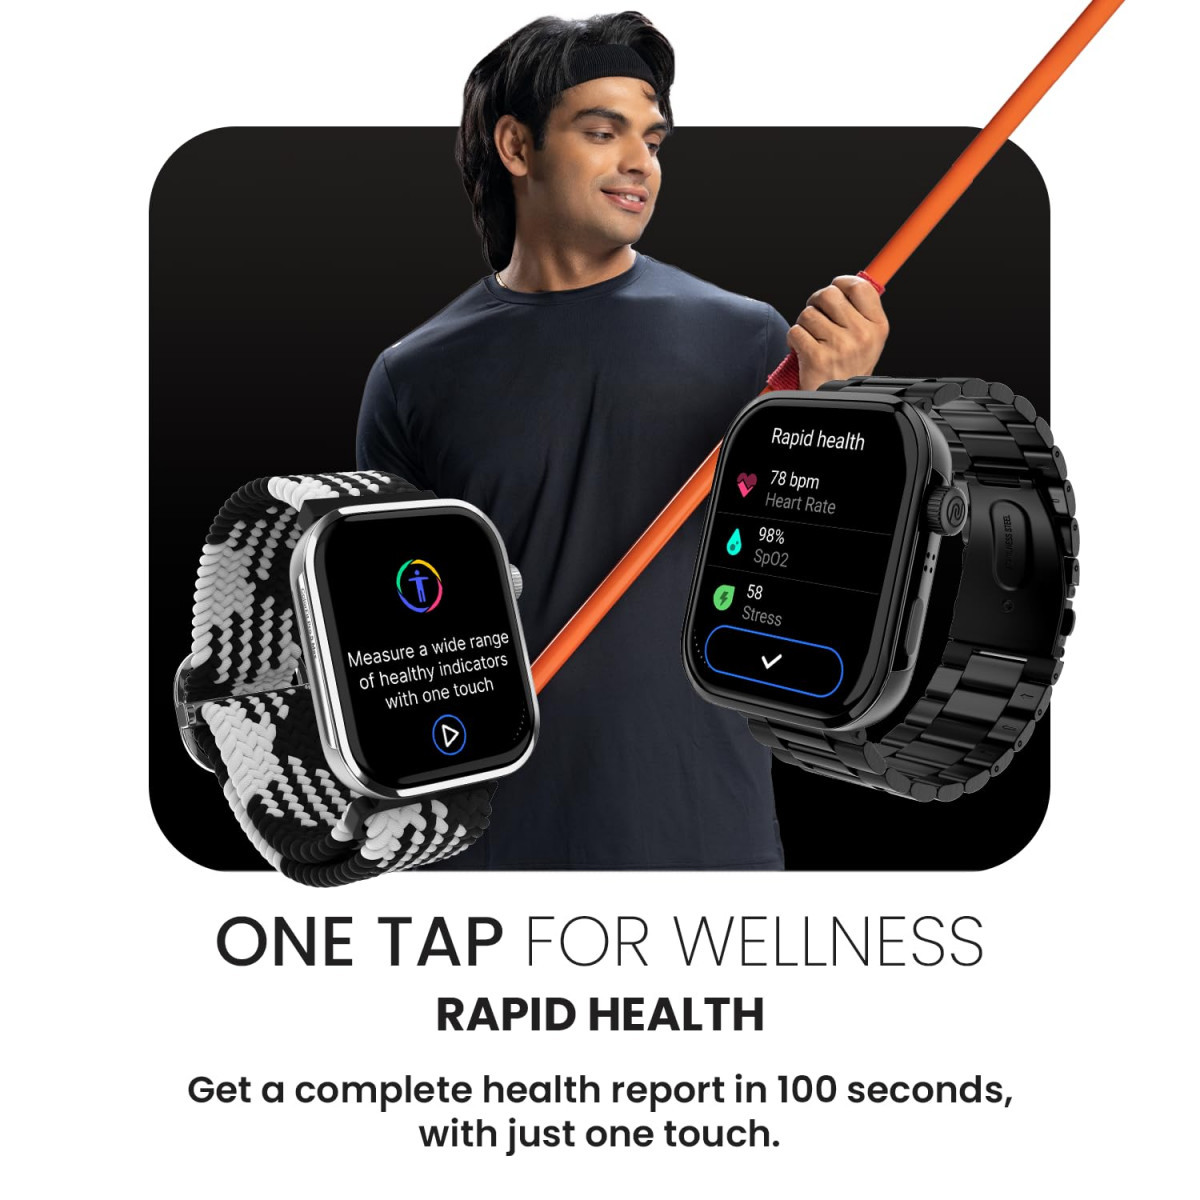 Noise Newly Launched ColorFit Pro 5 Max 196 AMOLED Display Smart Watch BT Calling Post Training Workout Analysis VO2 Max Rapid Health 5X Faster Data Transfer - Jet Black